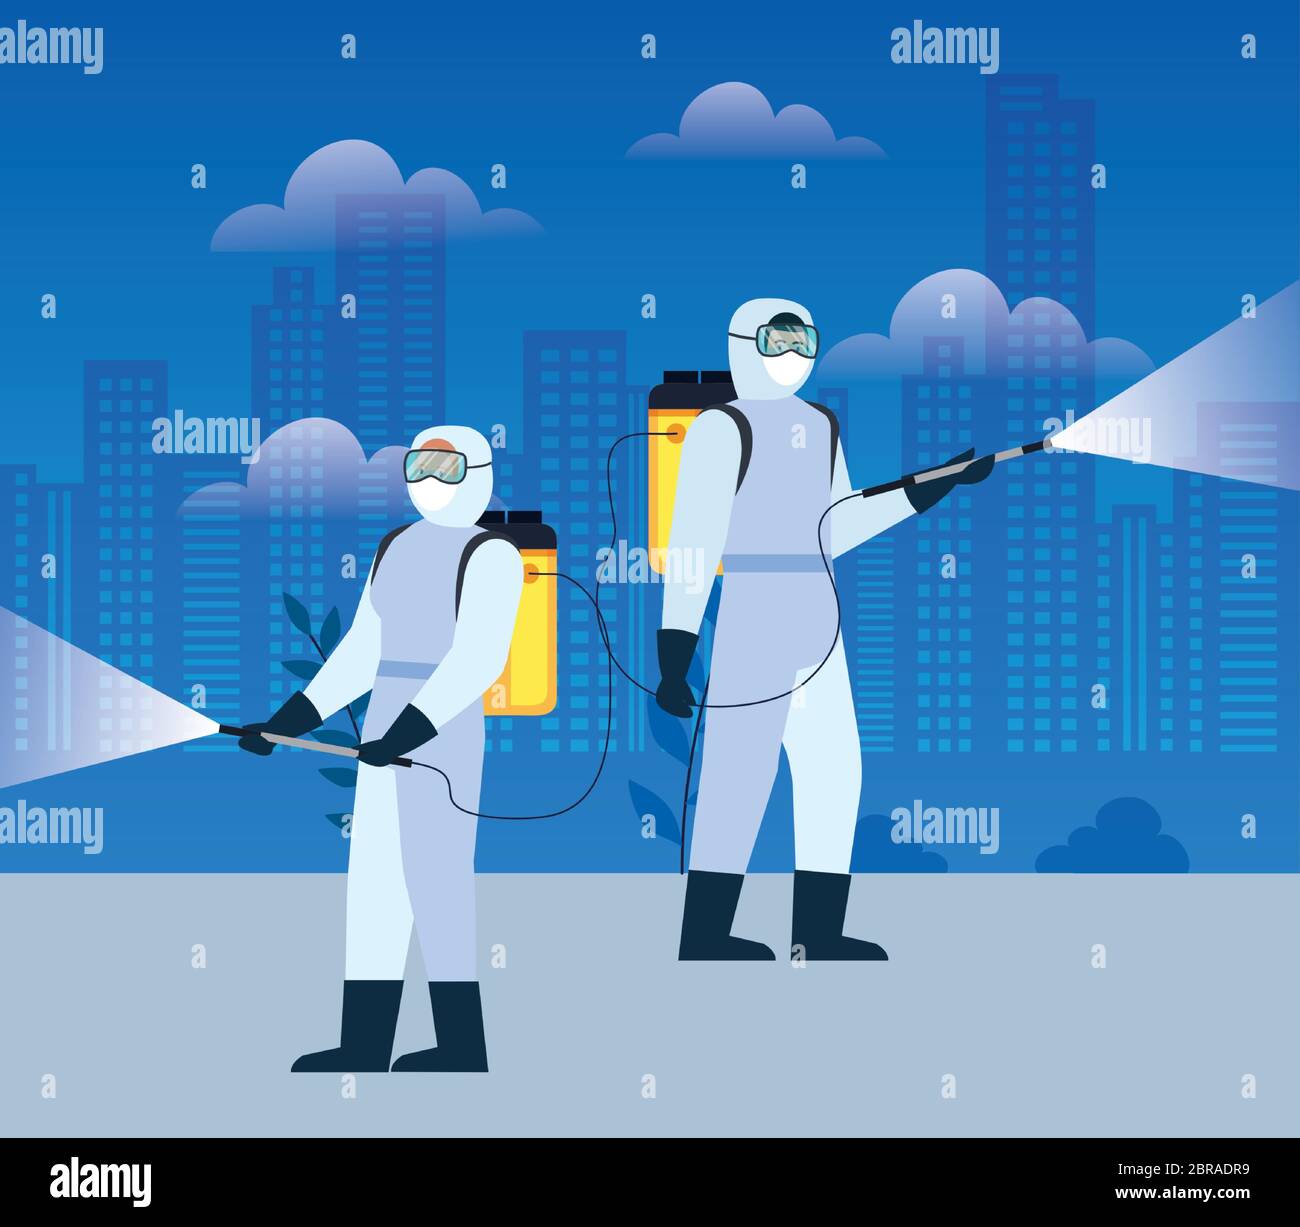 people with protective suit or spraying viruses of covid 19, desinfection virus concept Stock Vector